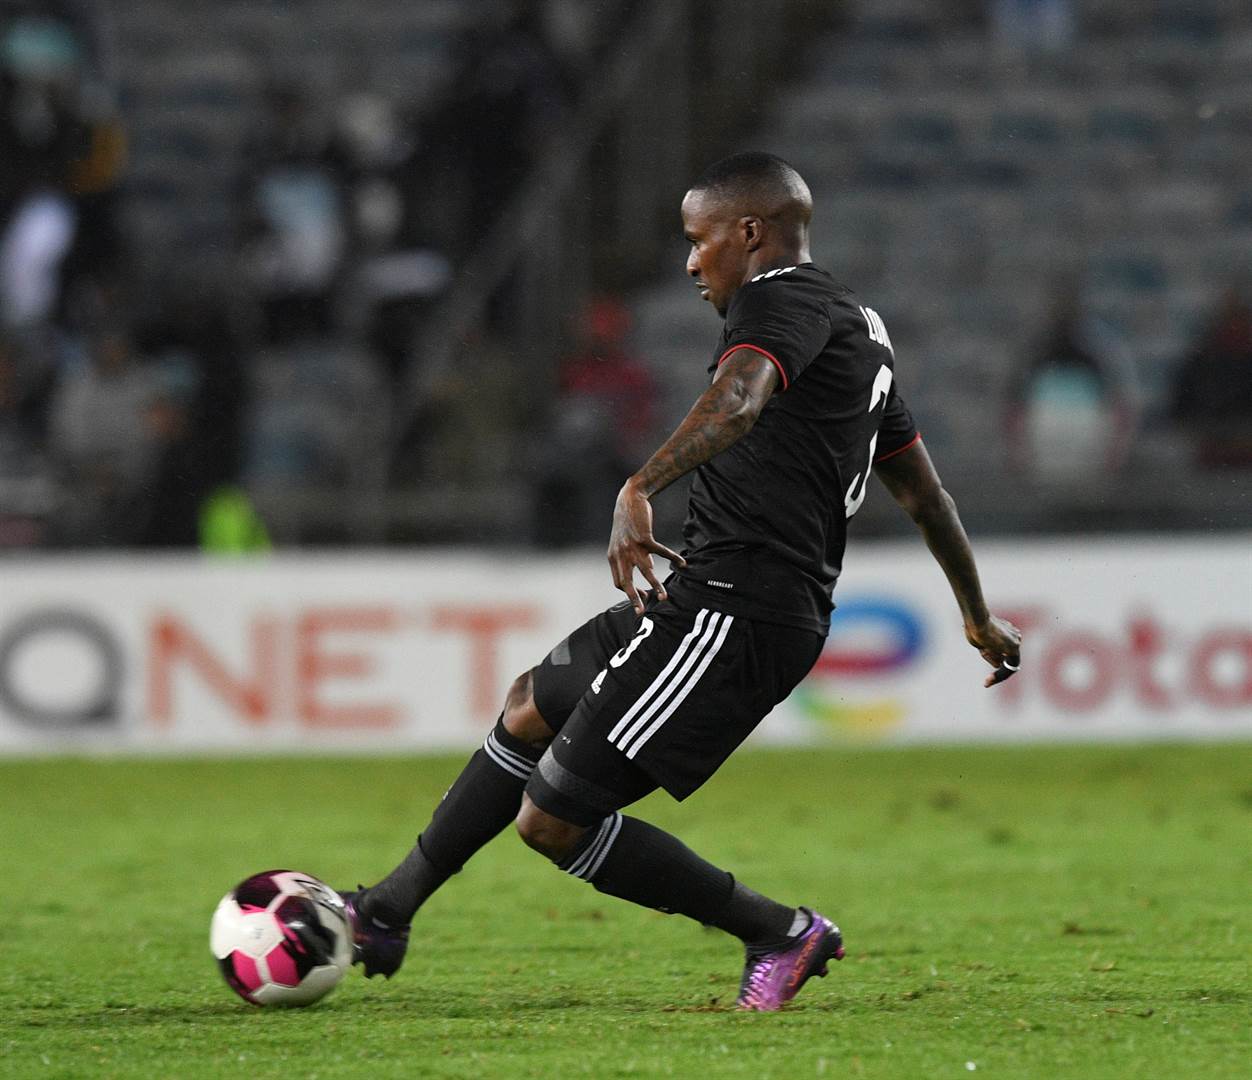 No longer just the fan's choice, as Maela is handed Orlando Pirates  captaincy